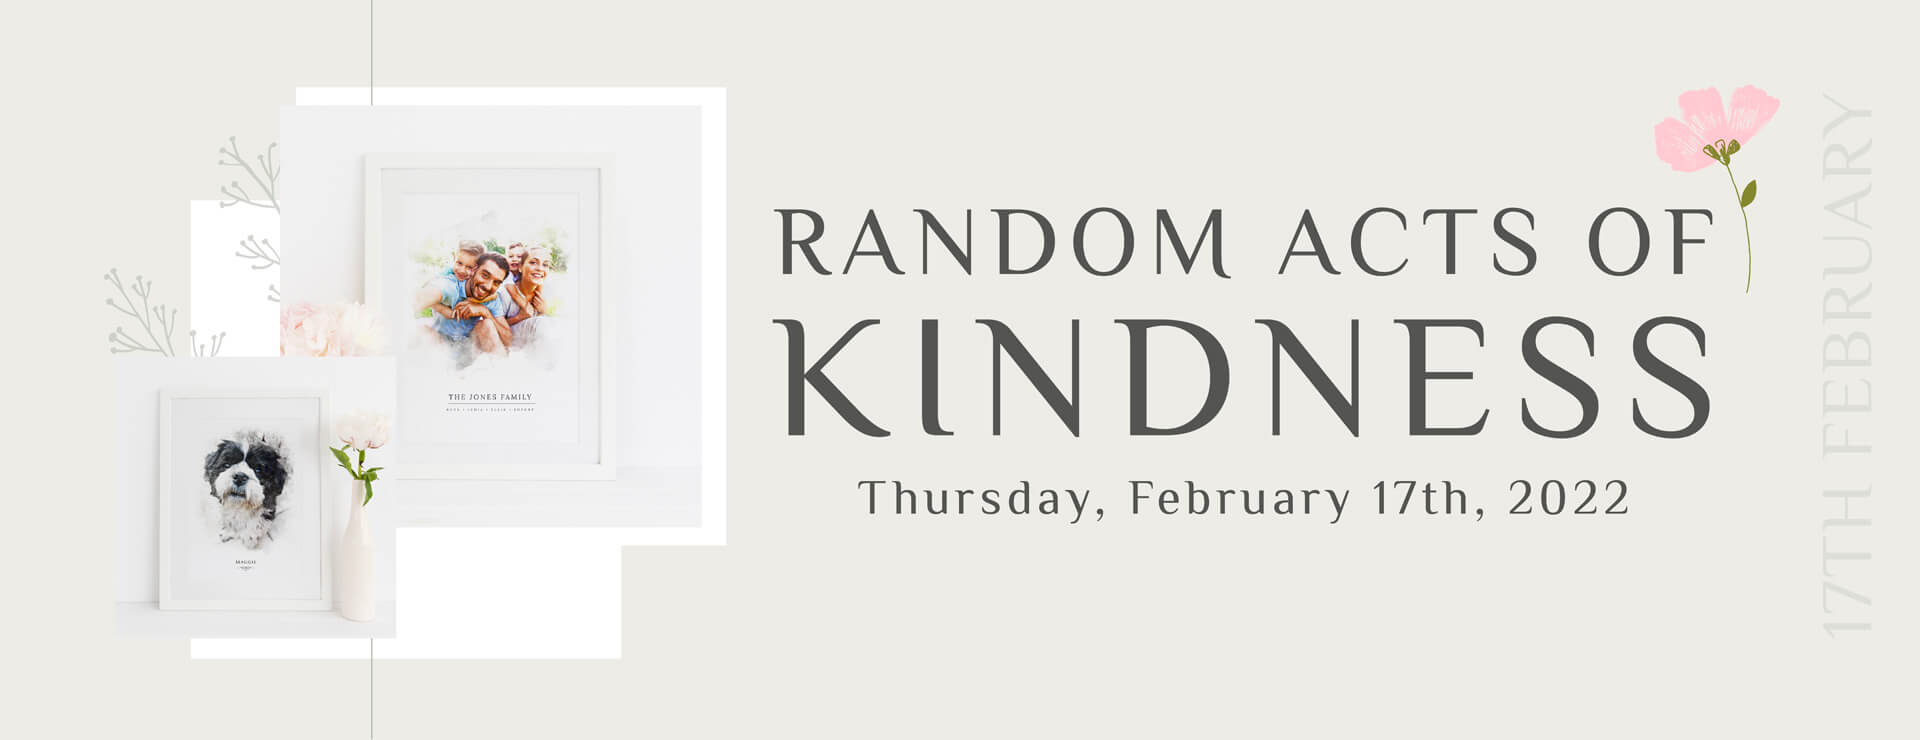 random acts of kindness 2022